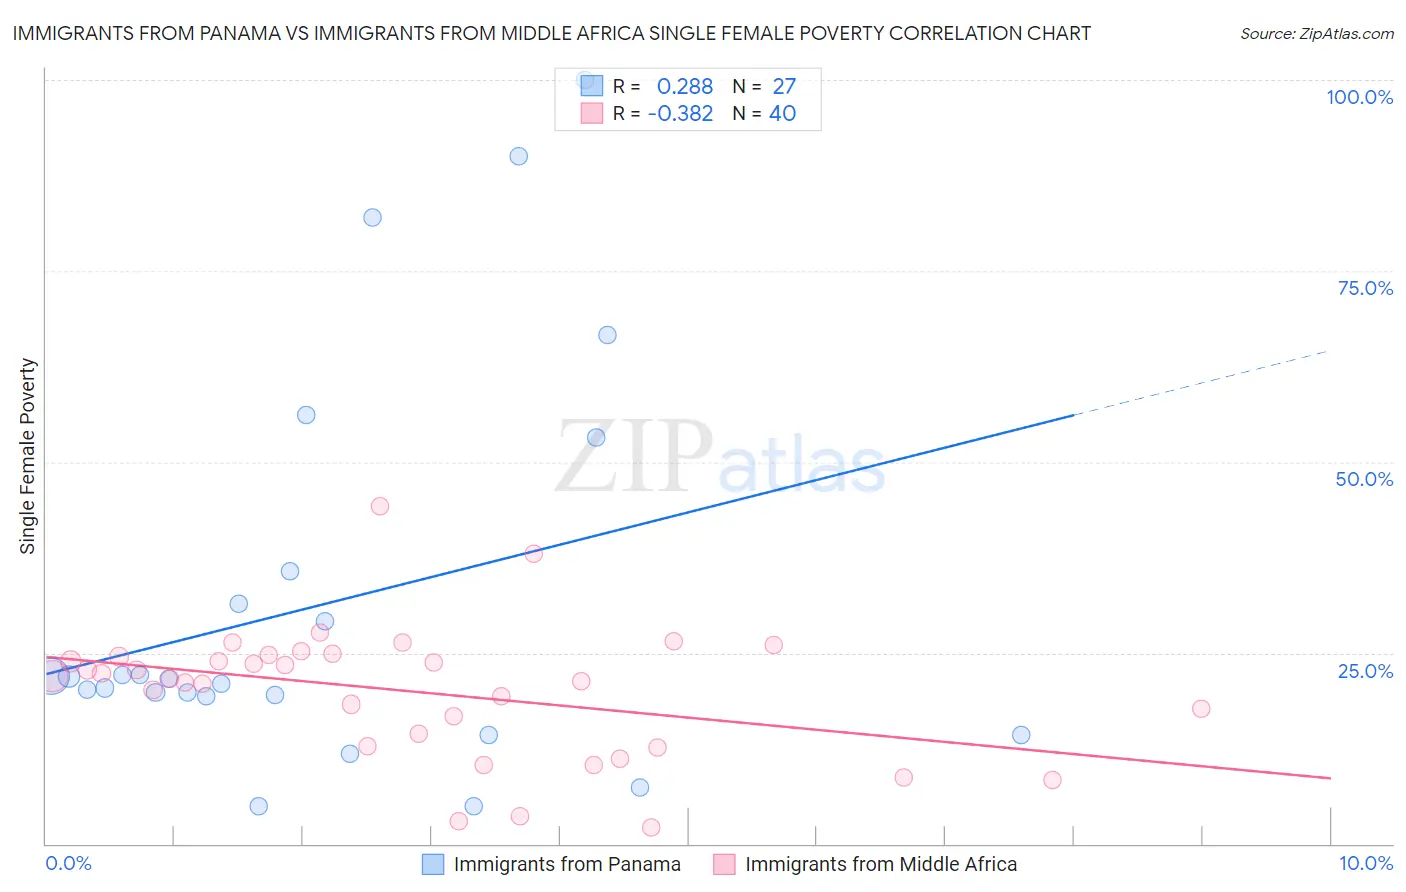 Immigrants from Panama vs Immigrants from Middle Africa Single Female Poverty